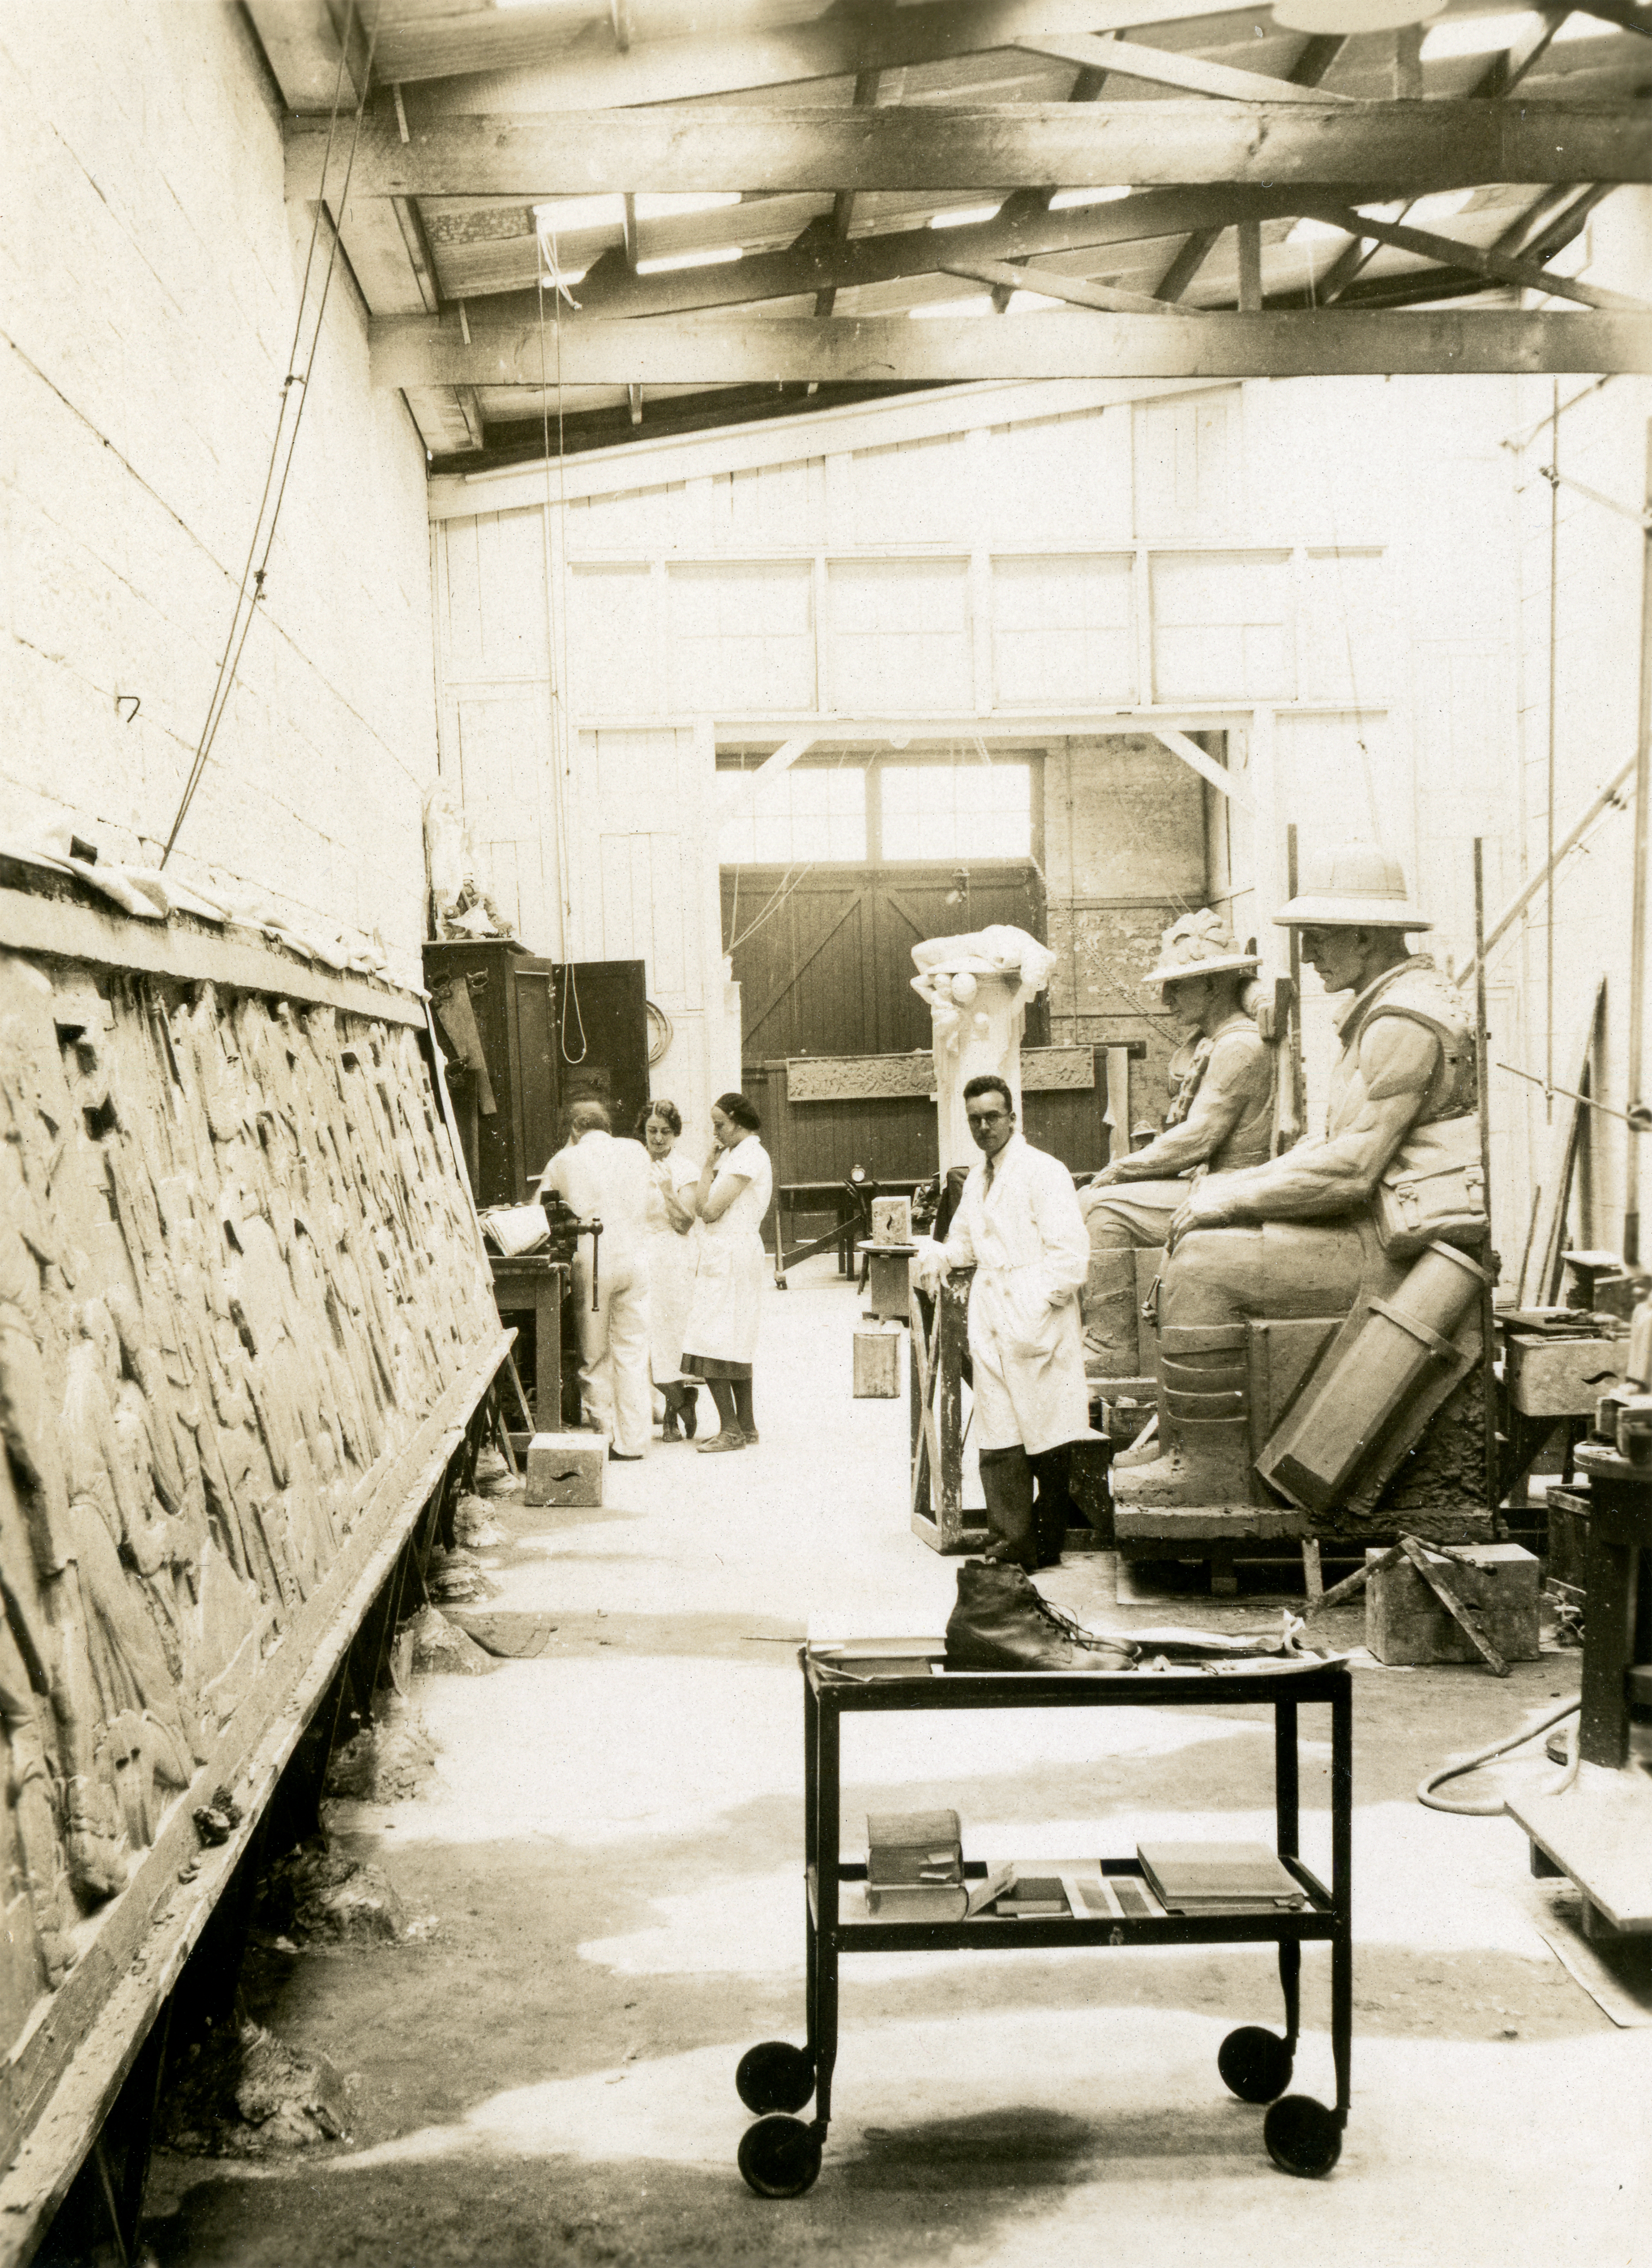 Arthur Buist in Hoff’s studio.  Sacrifice can be seen at the Southern end of the studio in plaster